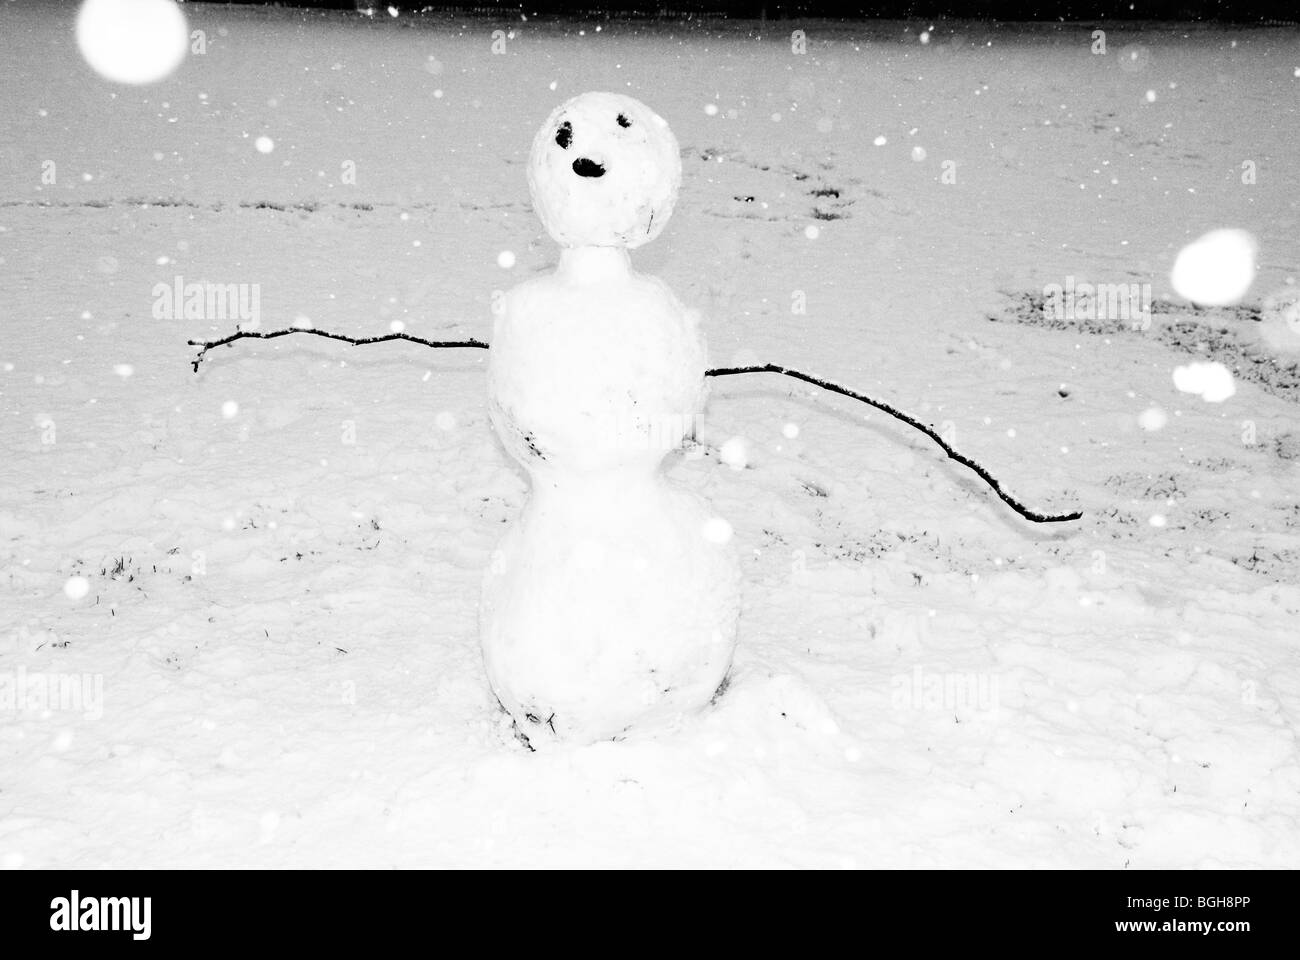 Hackney. London Fields. Snow.Snow man in park with snow falling Stock Photo